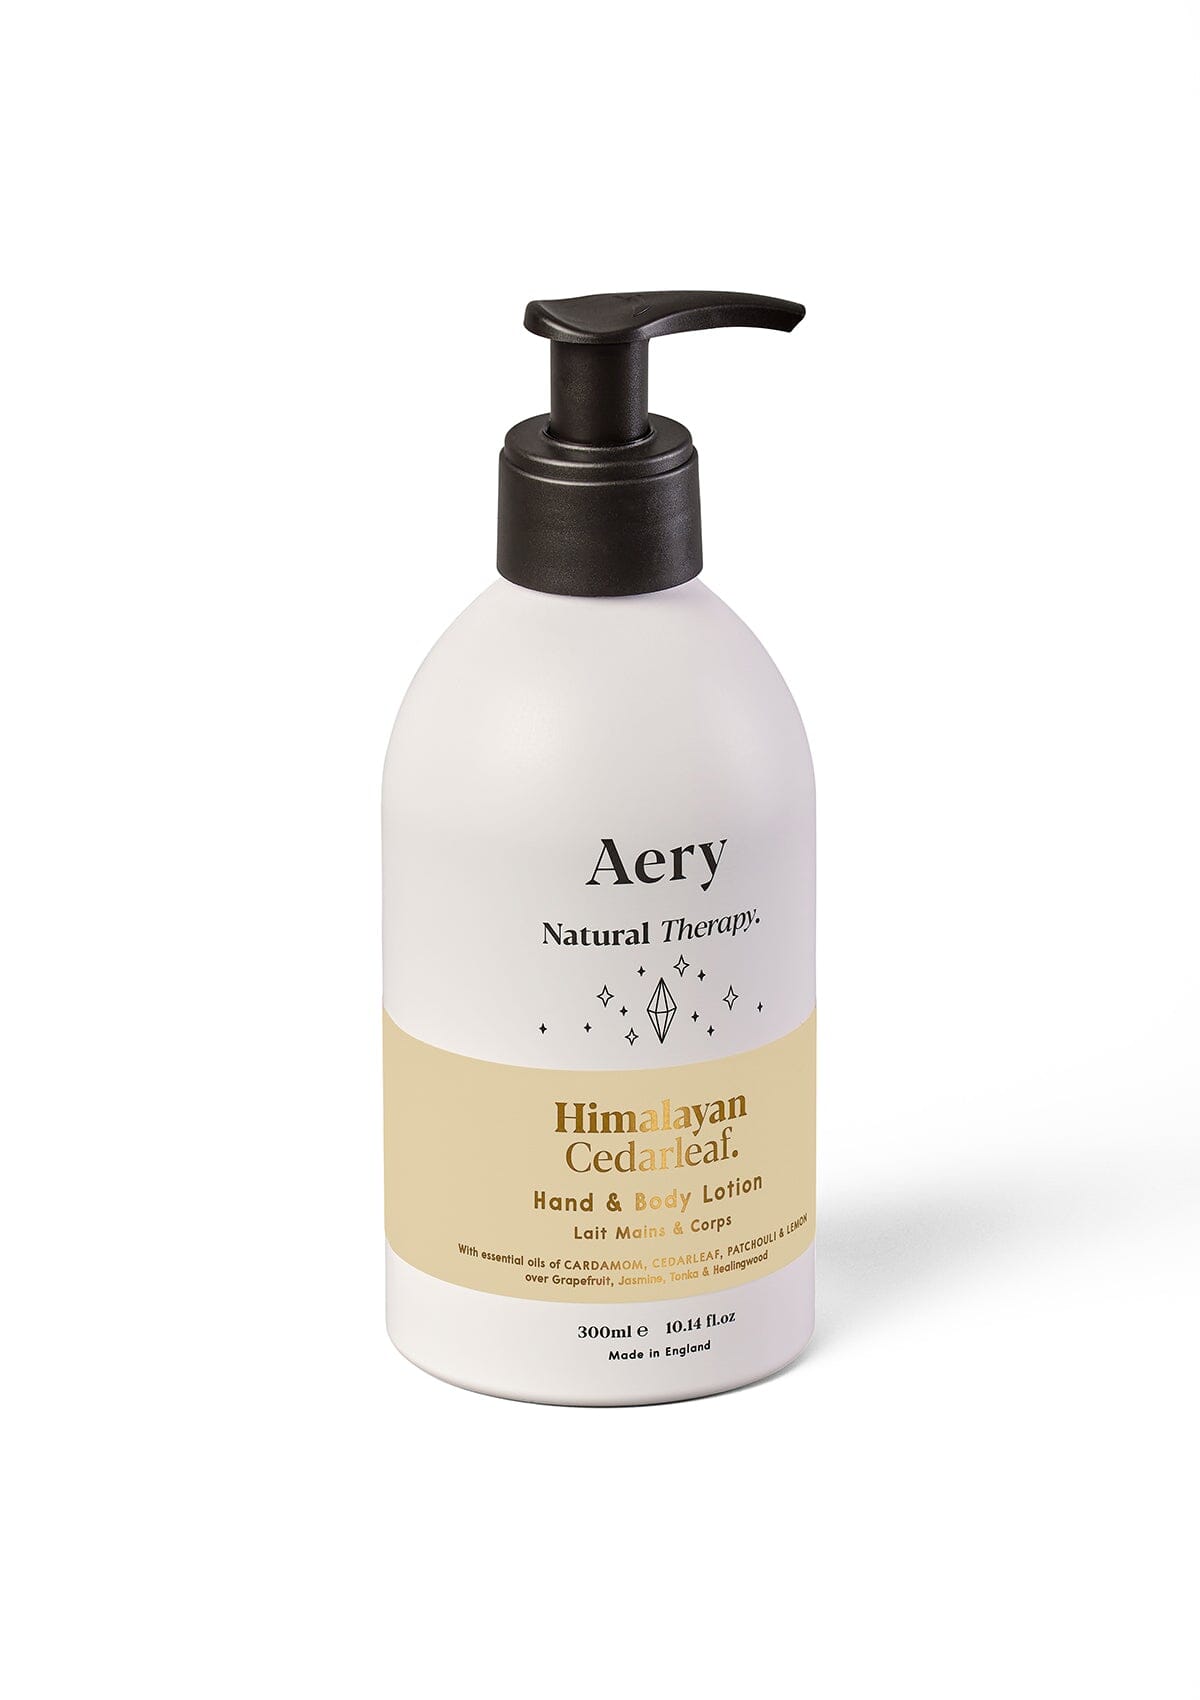 Cream Himalayan Cedarleaf Hand and Body Lotion by Aery displayed on white background